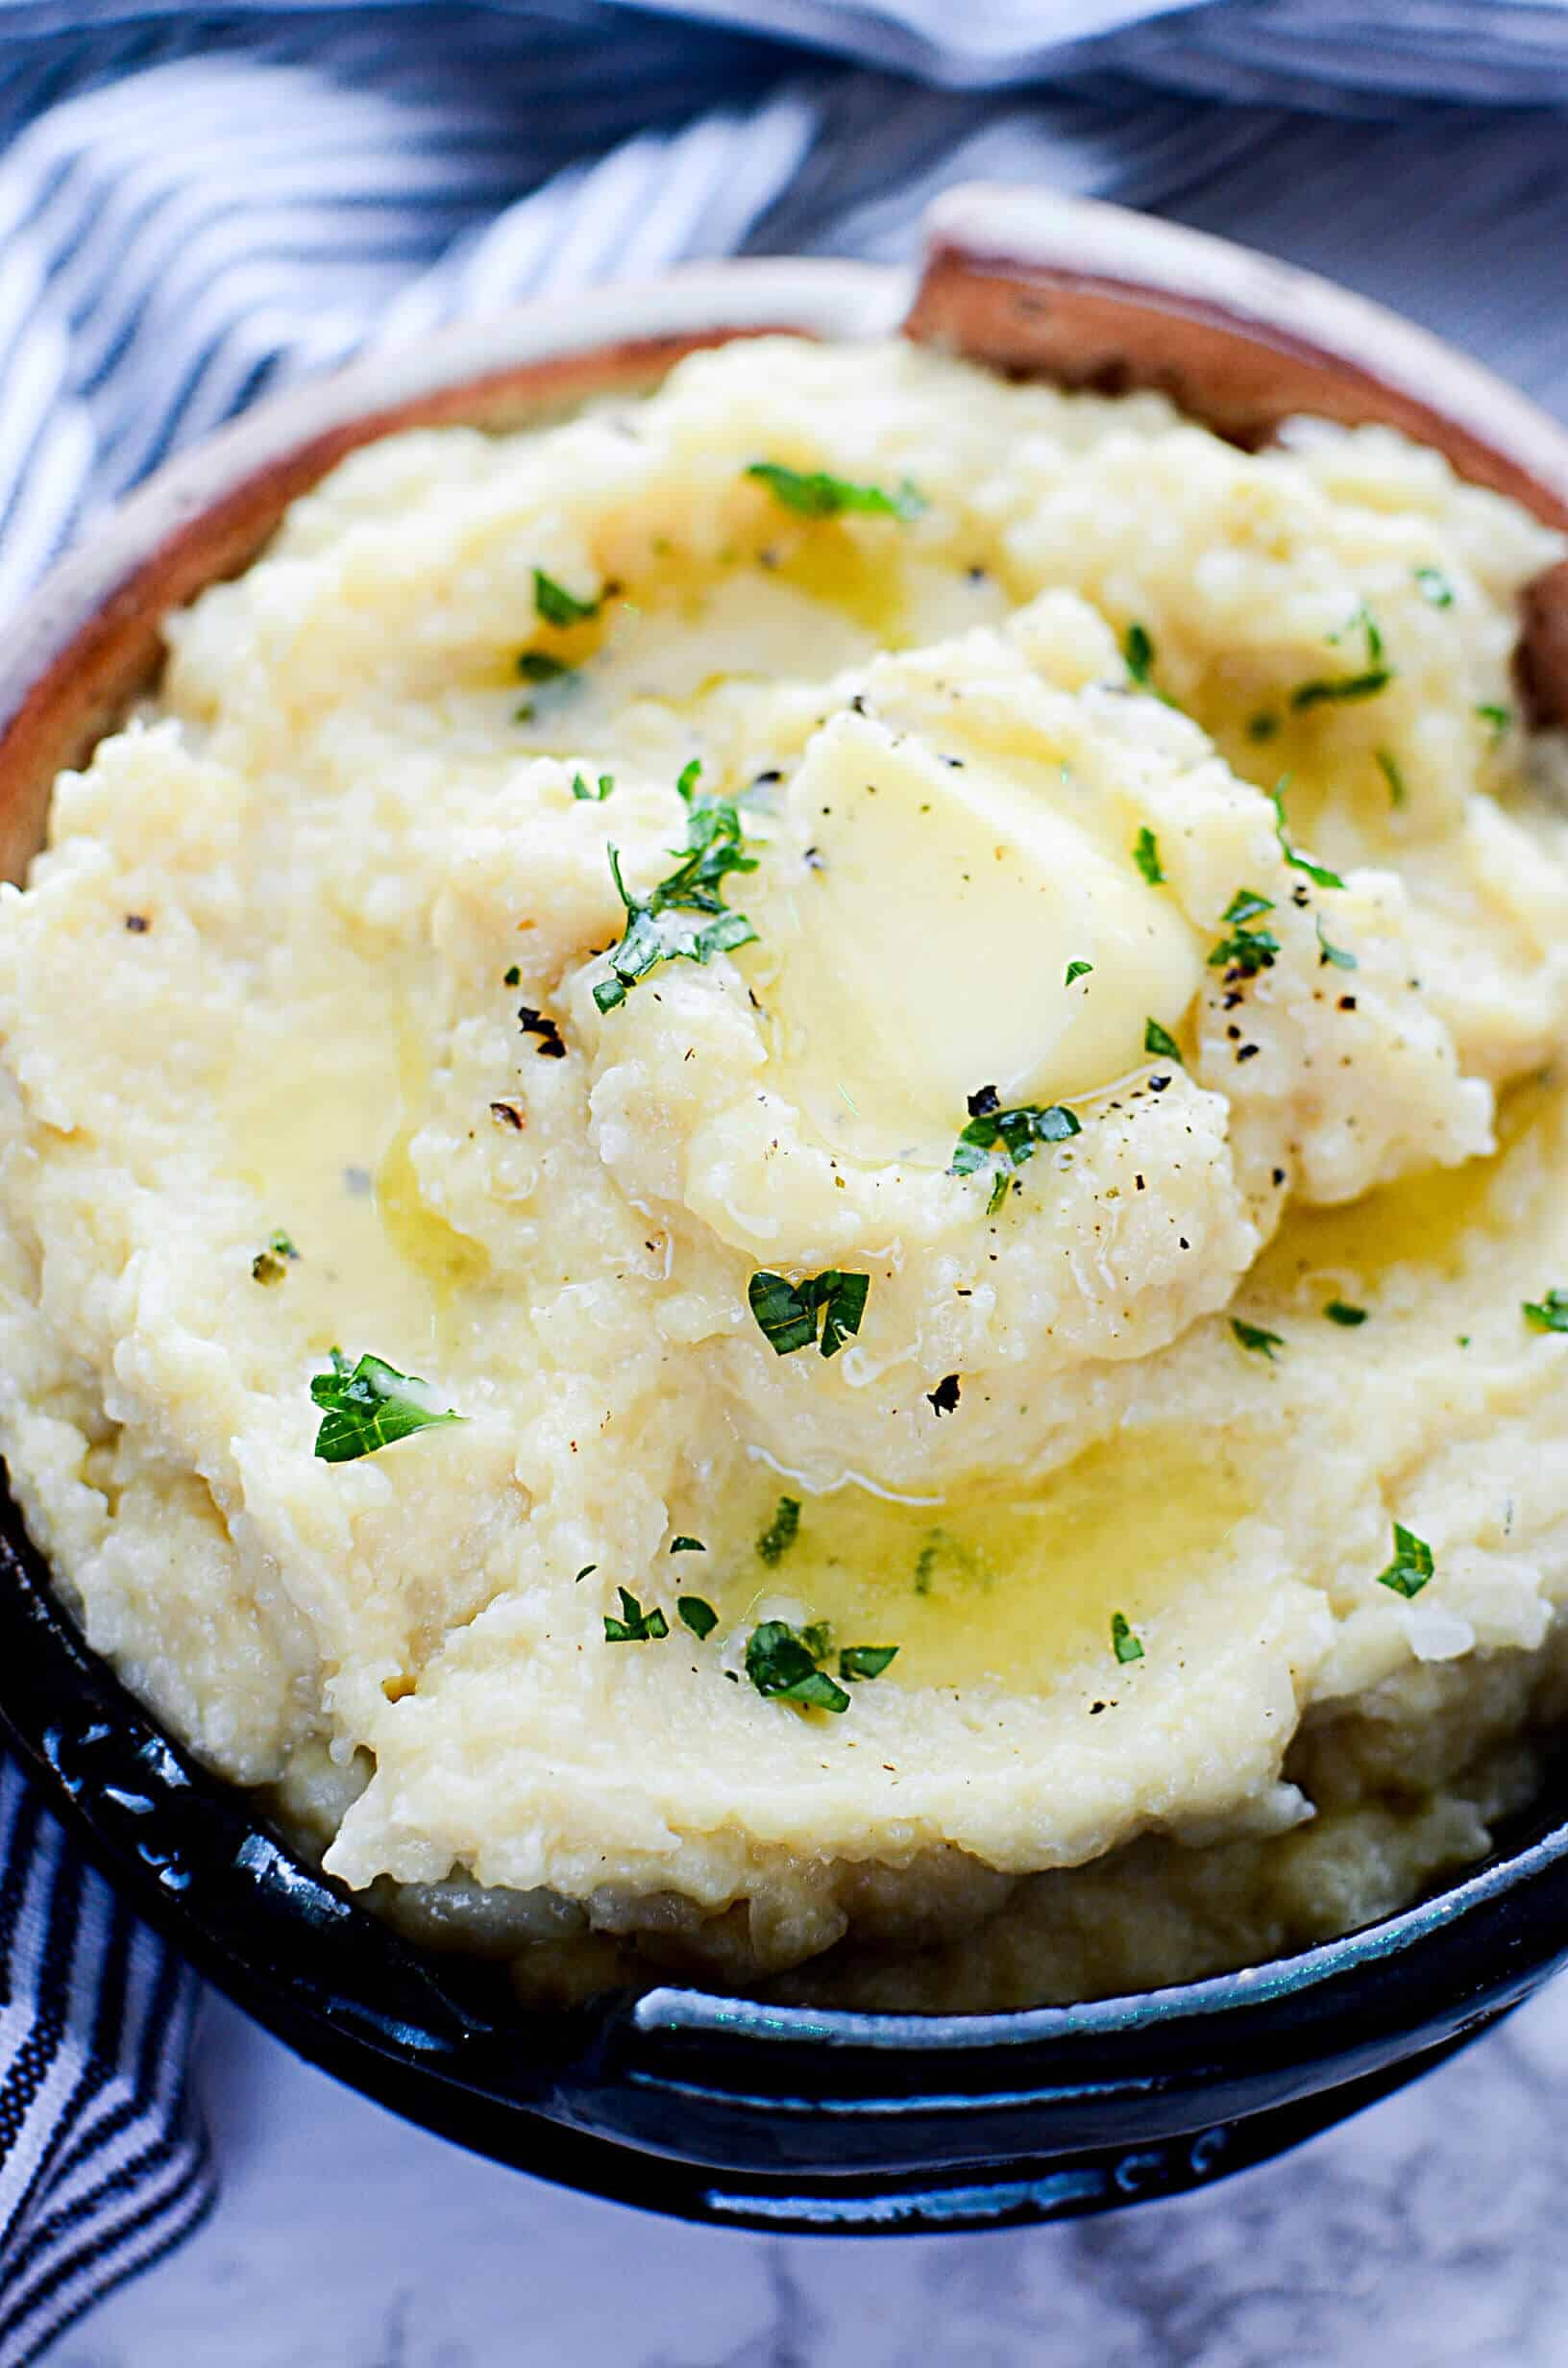 Recipes For Cauliflower Mashed Potatoes
 HOW TO MAKE CAULIFLOWER MASHED POTATOES SUPER DELICIOUS